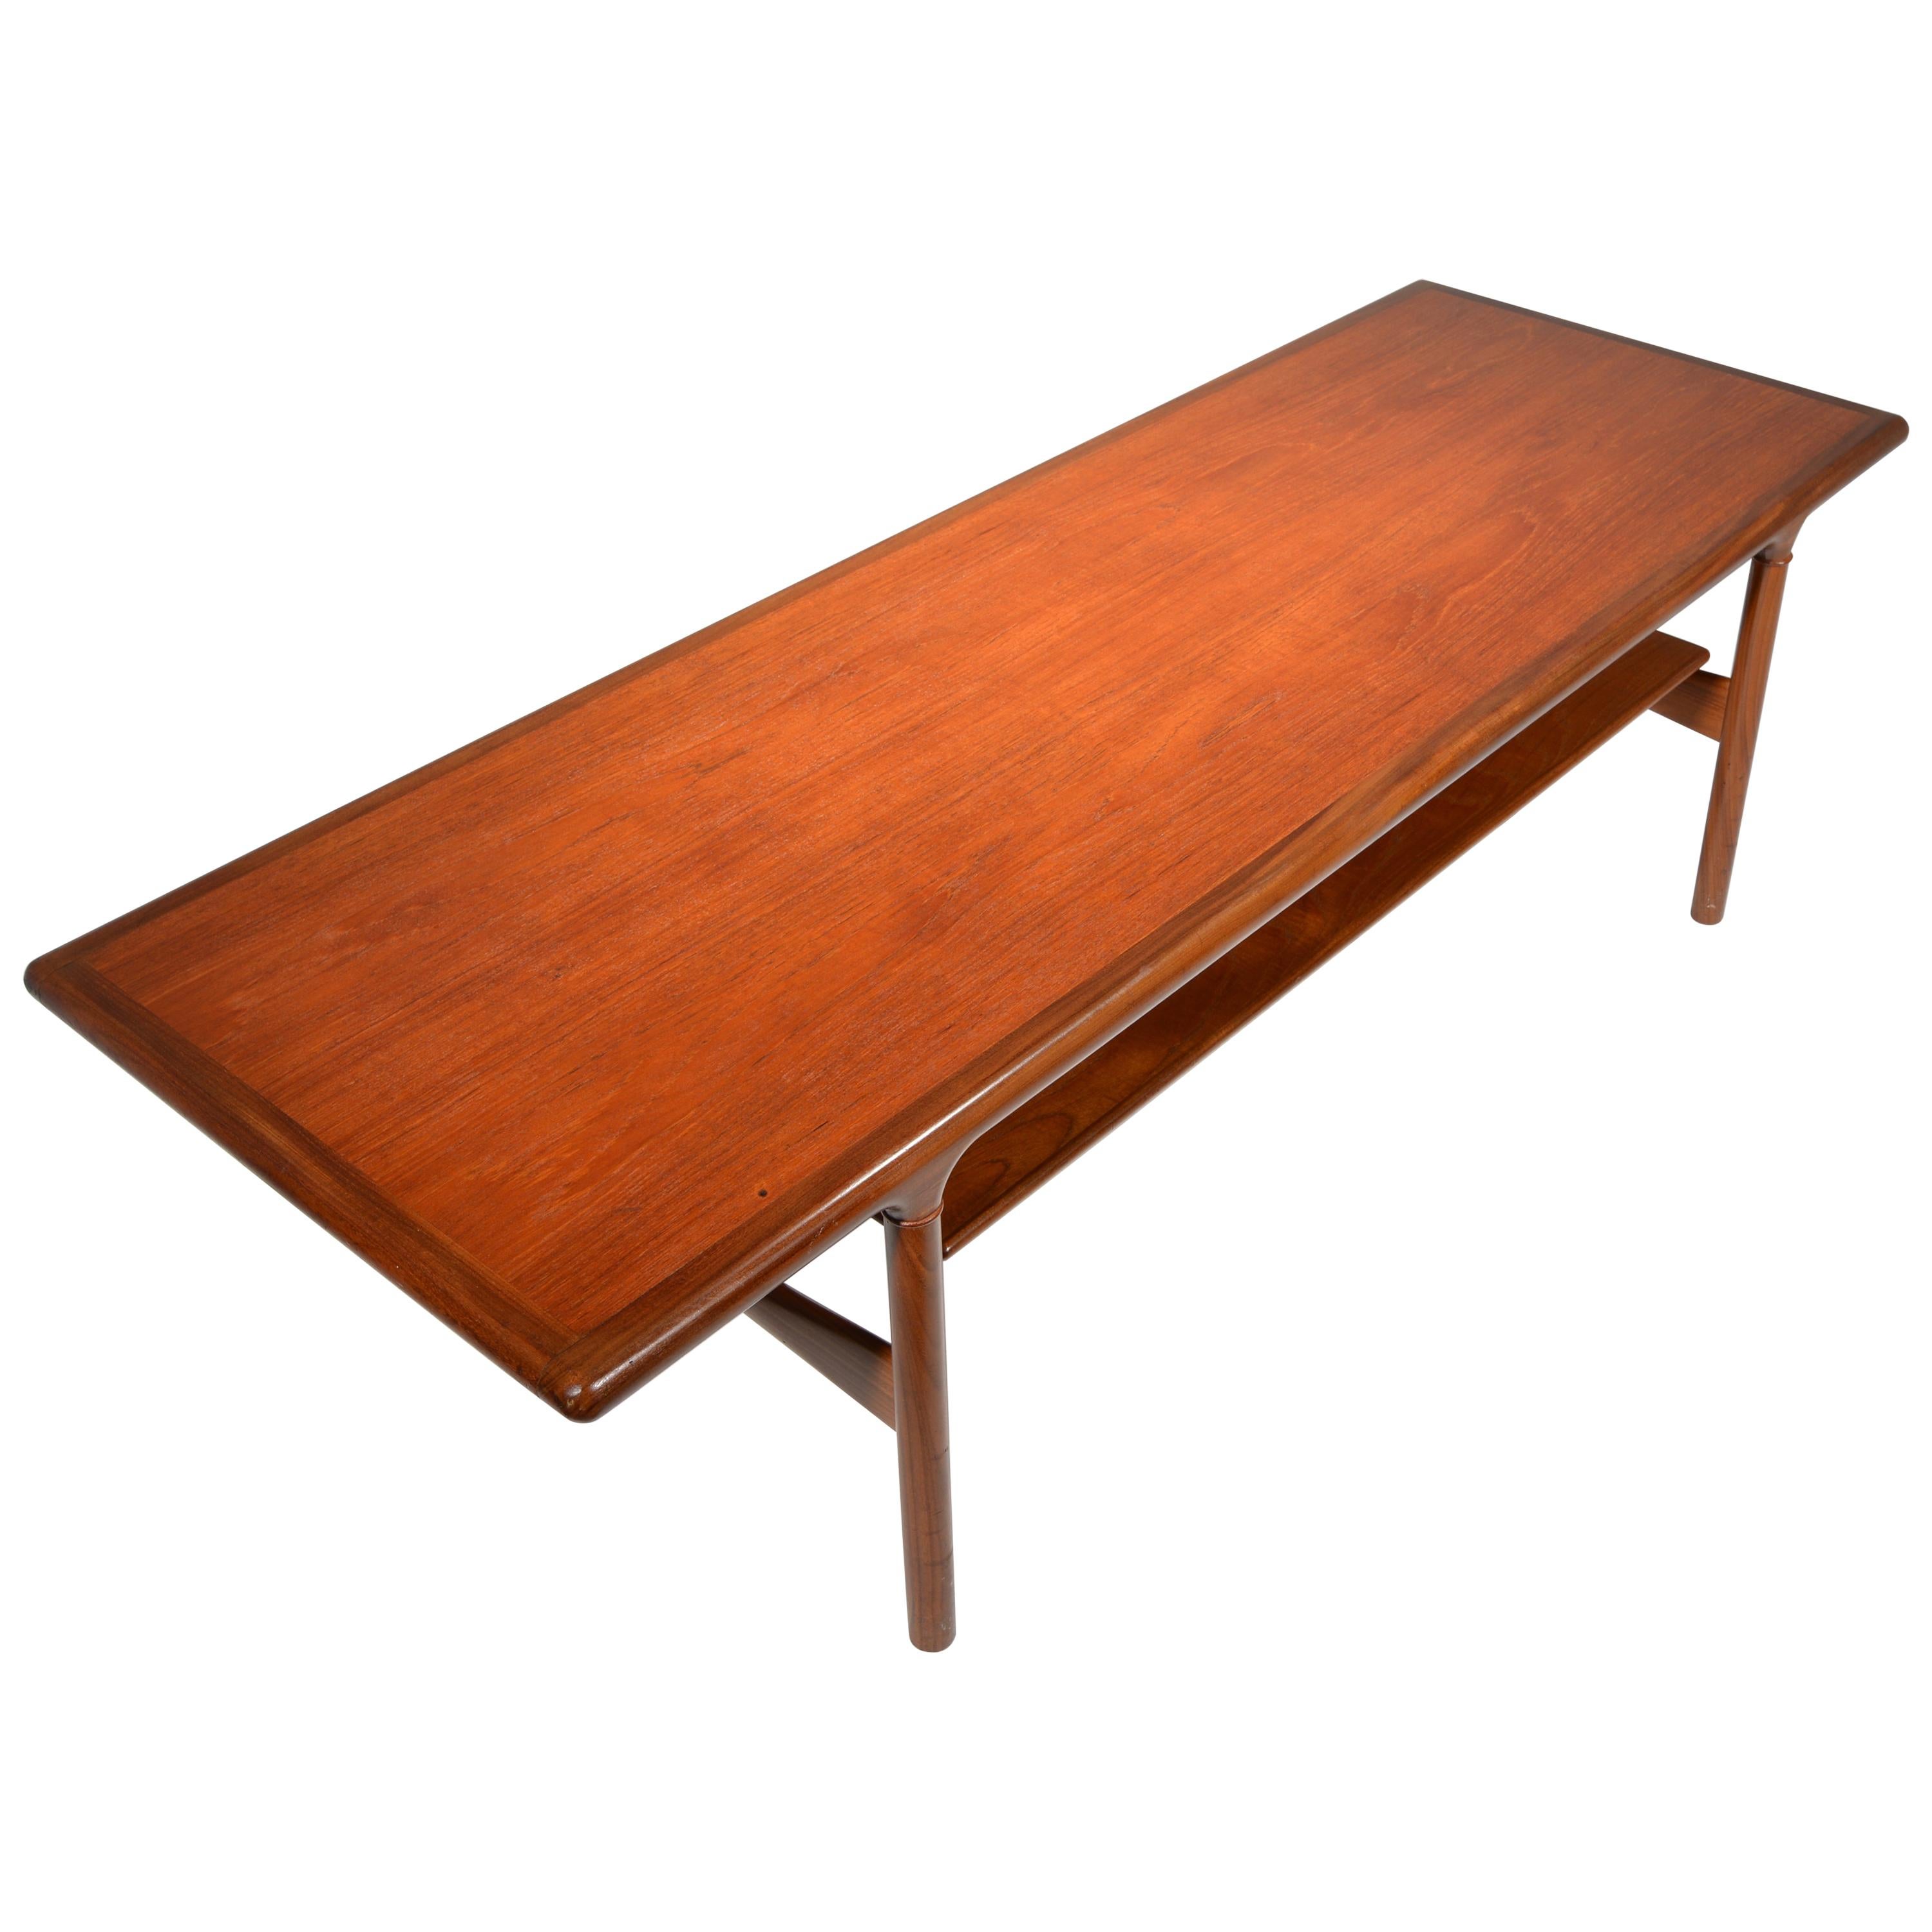 Rare Large Midcentury Extending Teak Coffee Table with Floating Shelf For Sale